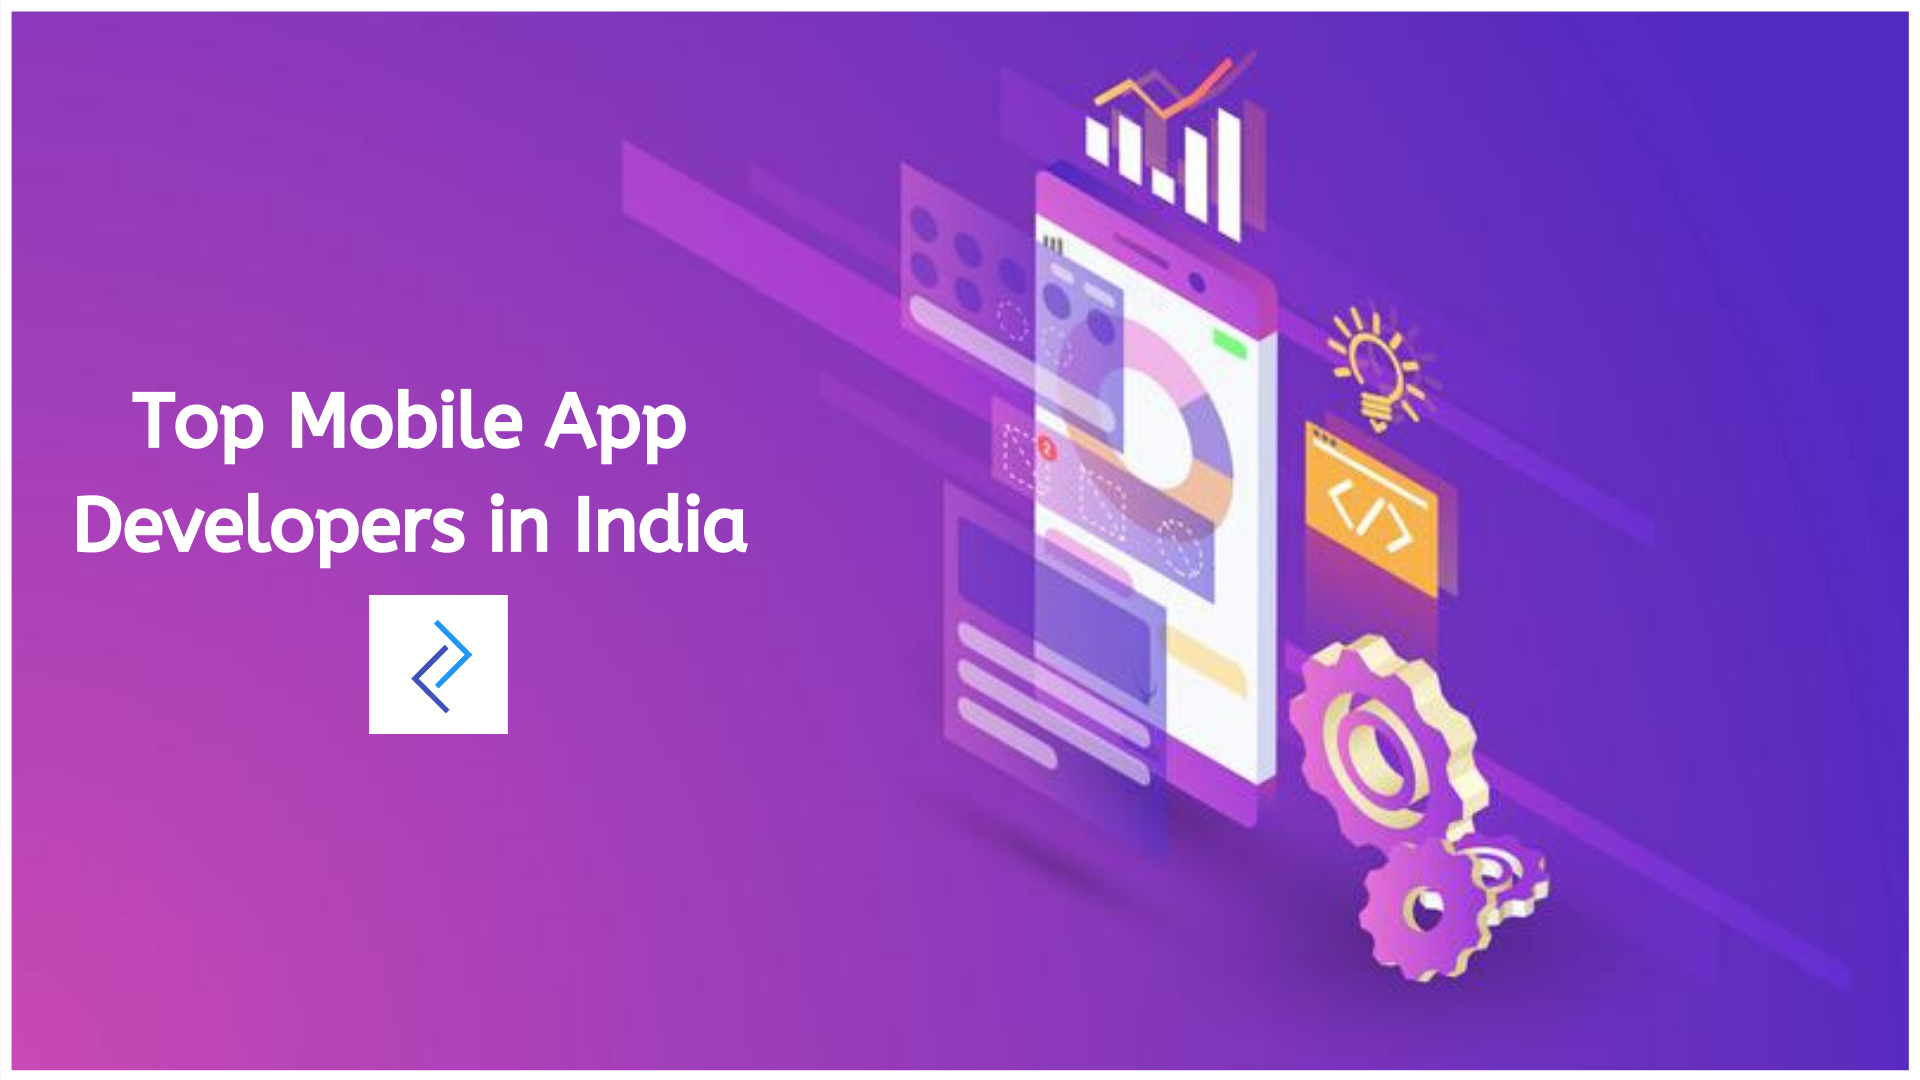 Top Mobile App Developers In India